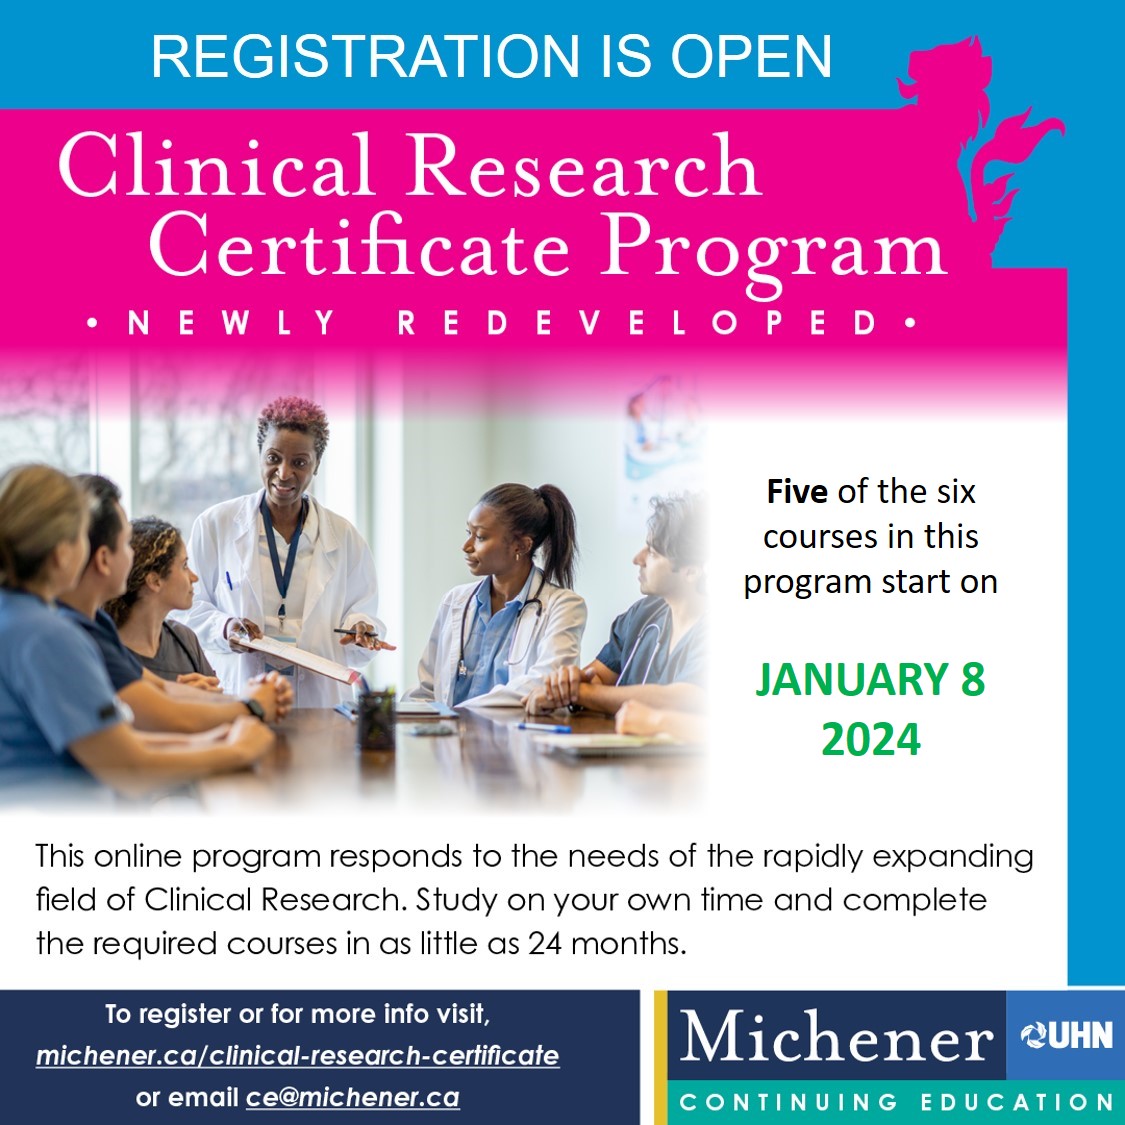 Gain expertise in research methodologies and regulations! Boost your career or explore new domains - register before DEC 23 at bit.ly/3umVoIM 

#ClinicalResearch #HealthcareEducation #ResearchSkills #ClinicalTrials #MedEd #CareerInResearch #HealthScience